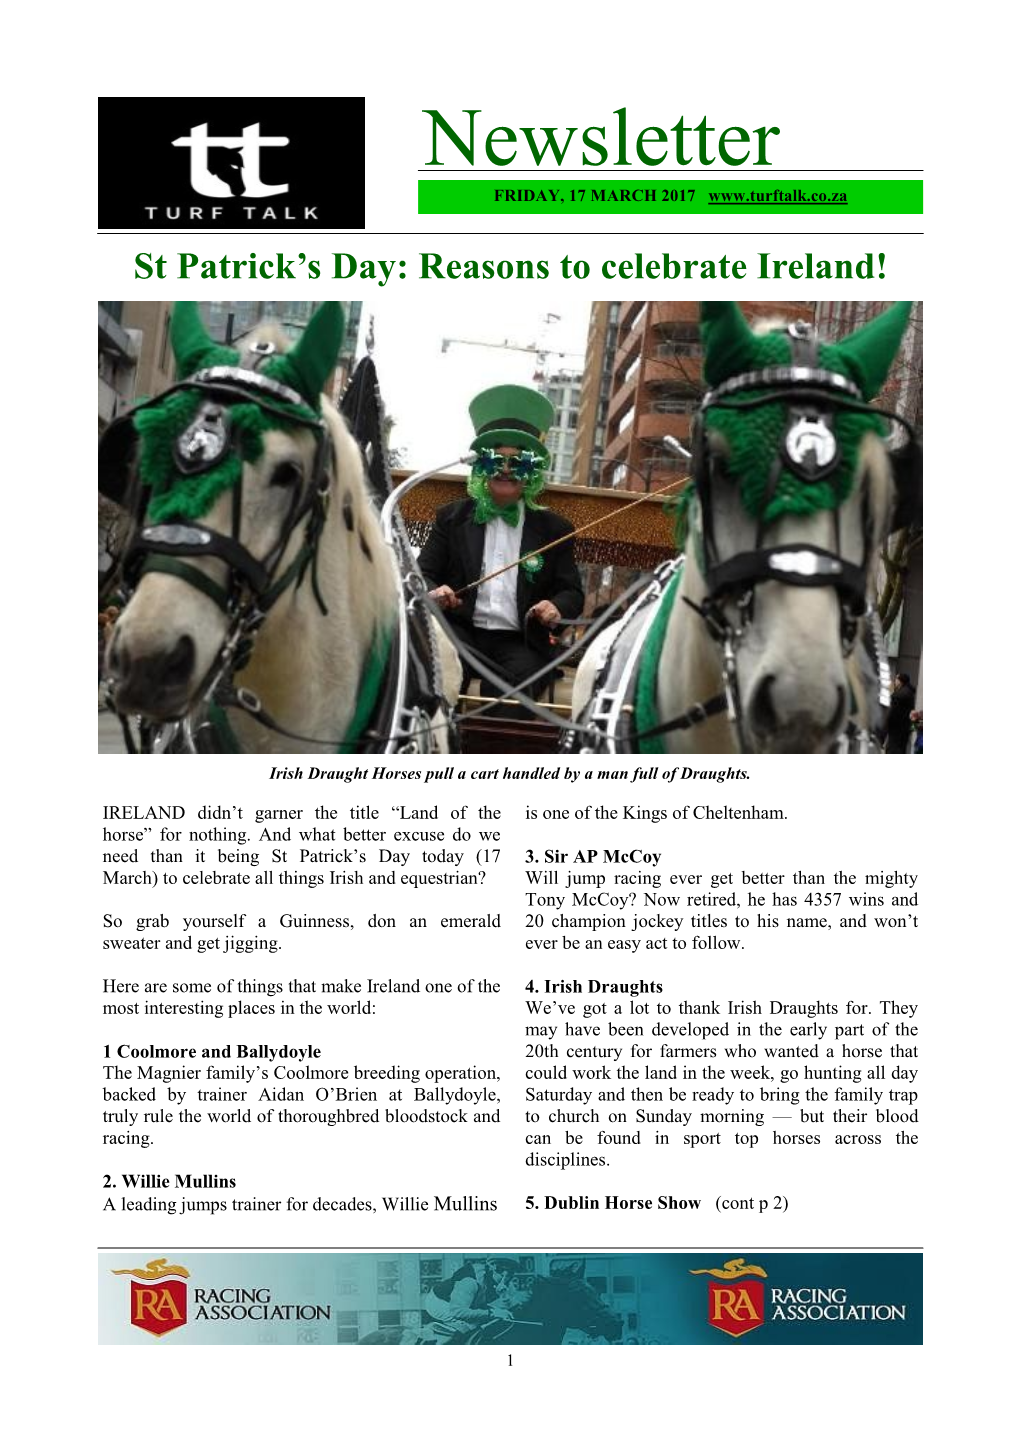 Newsletter FRIDAY, 17 MARCH 2017 THTHURSDAY 9 FEBRUARY 2017 St Patrick’S Day: Reasons to Celebrate Ireland!